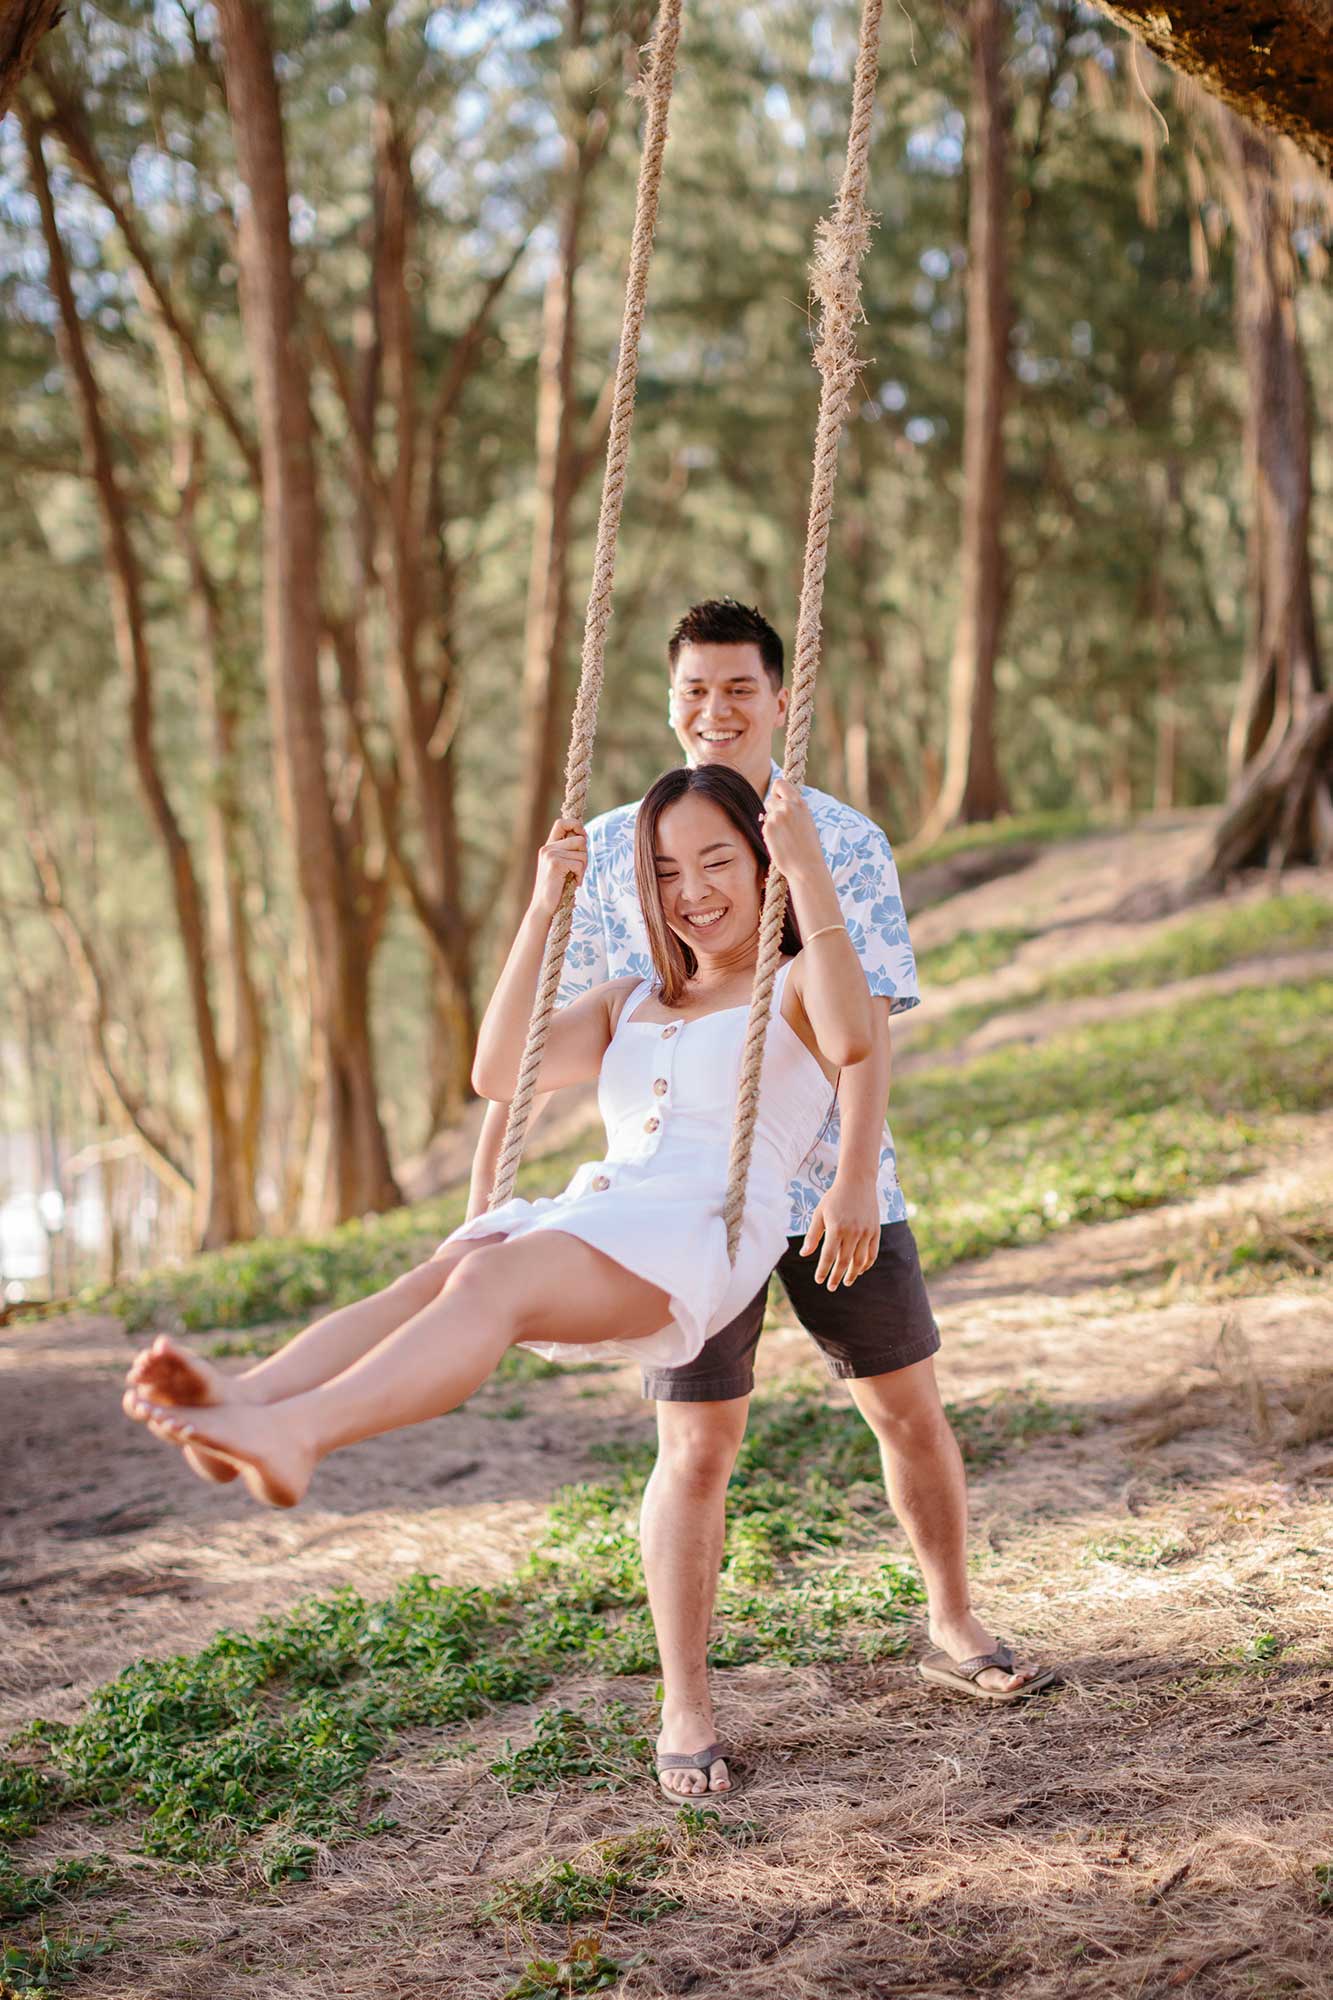 image of man pushing his girlfriend on a swing